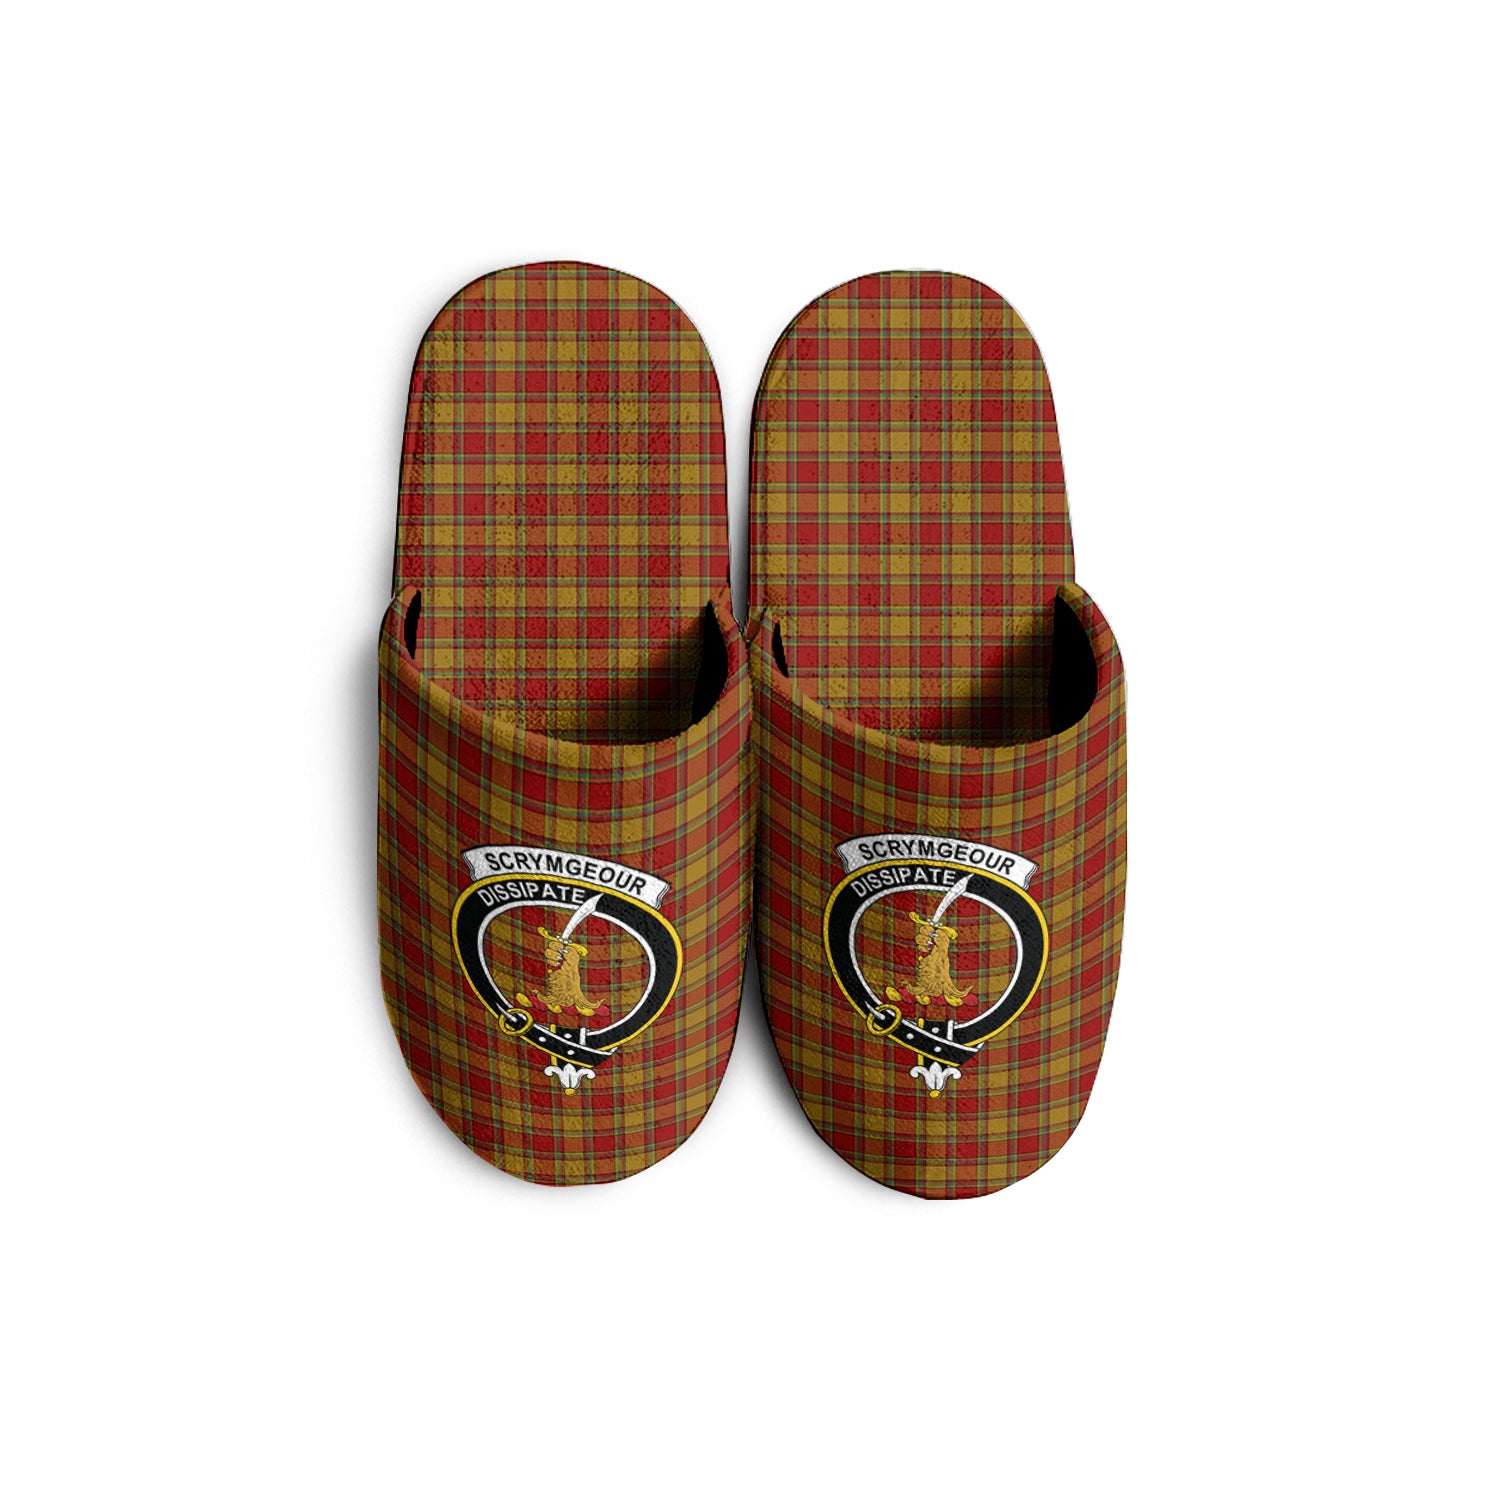 scrymgeour-tartan-crest-slippers-famiy-crest-plaid-slippers